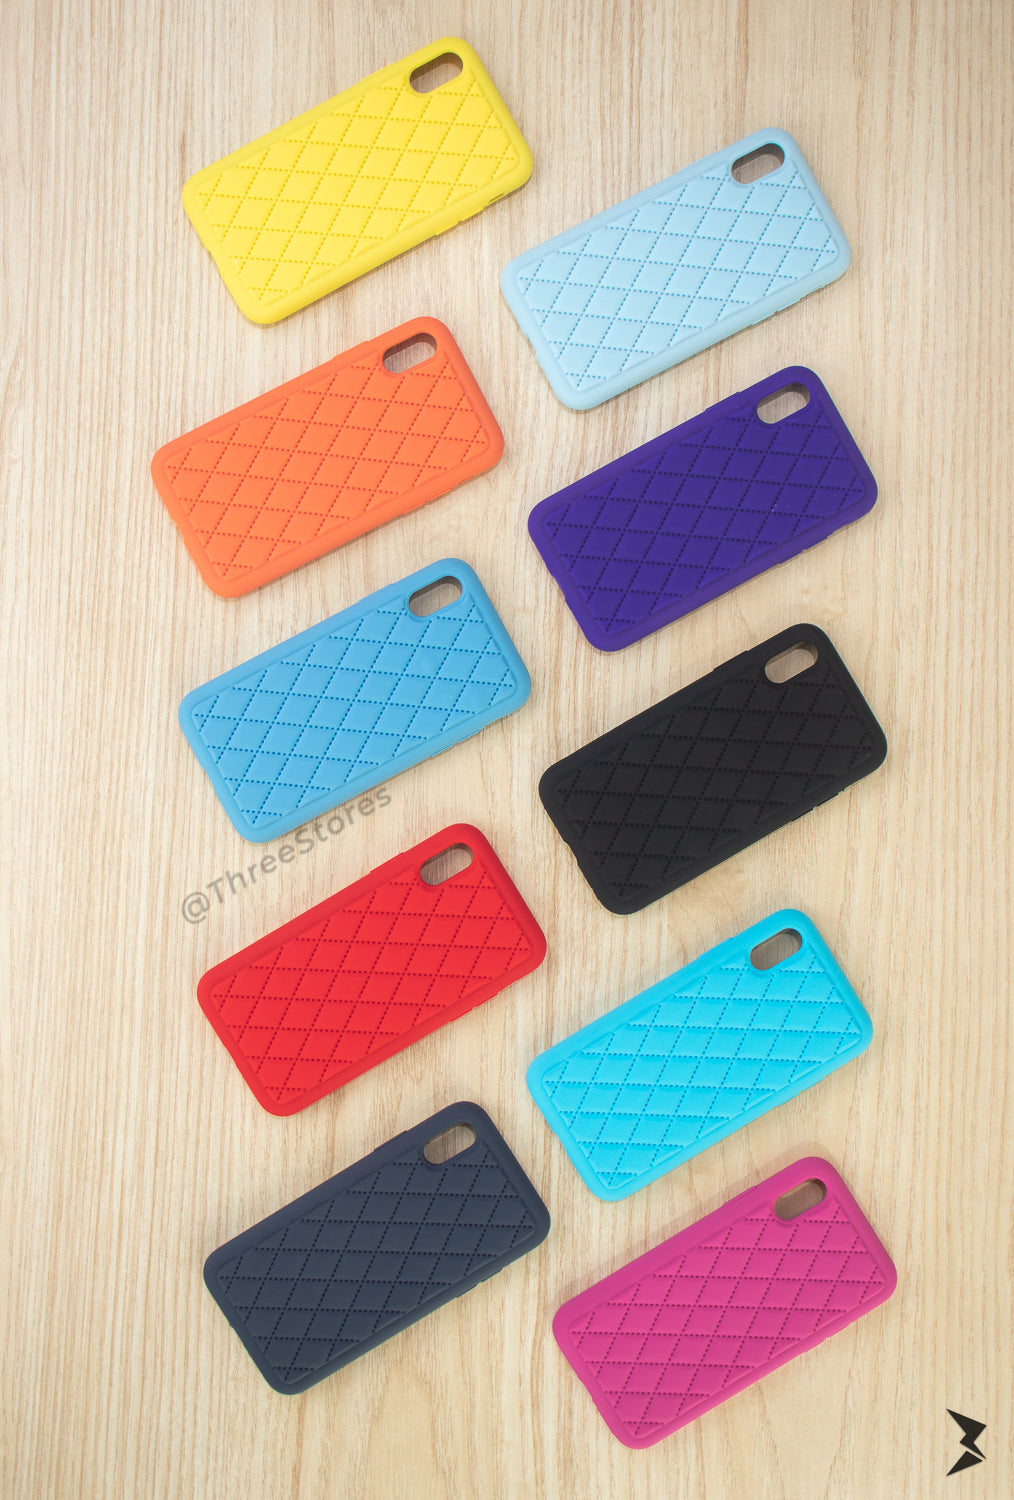 Woven Pattern Case iPhone X